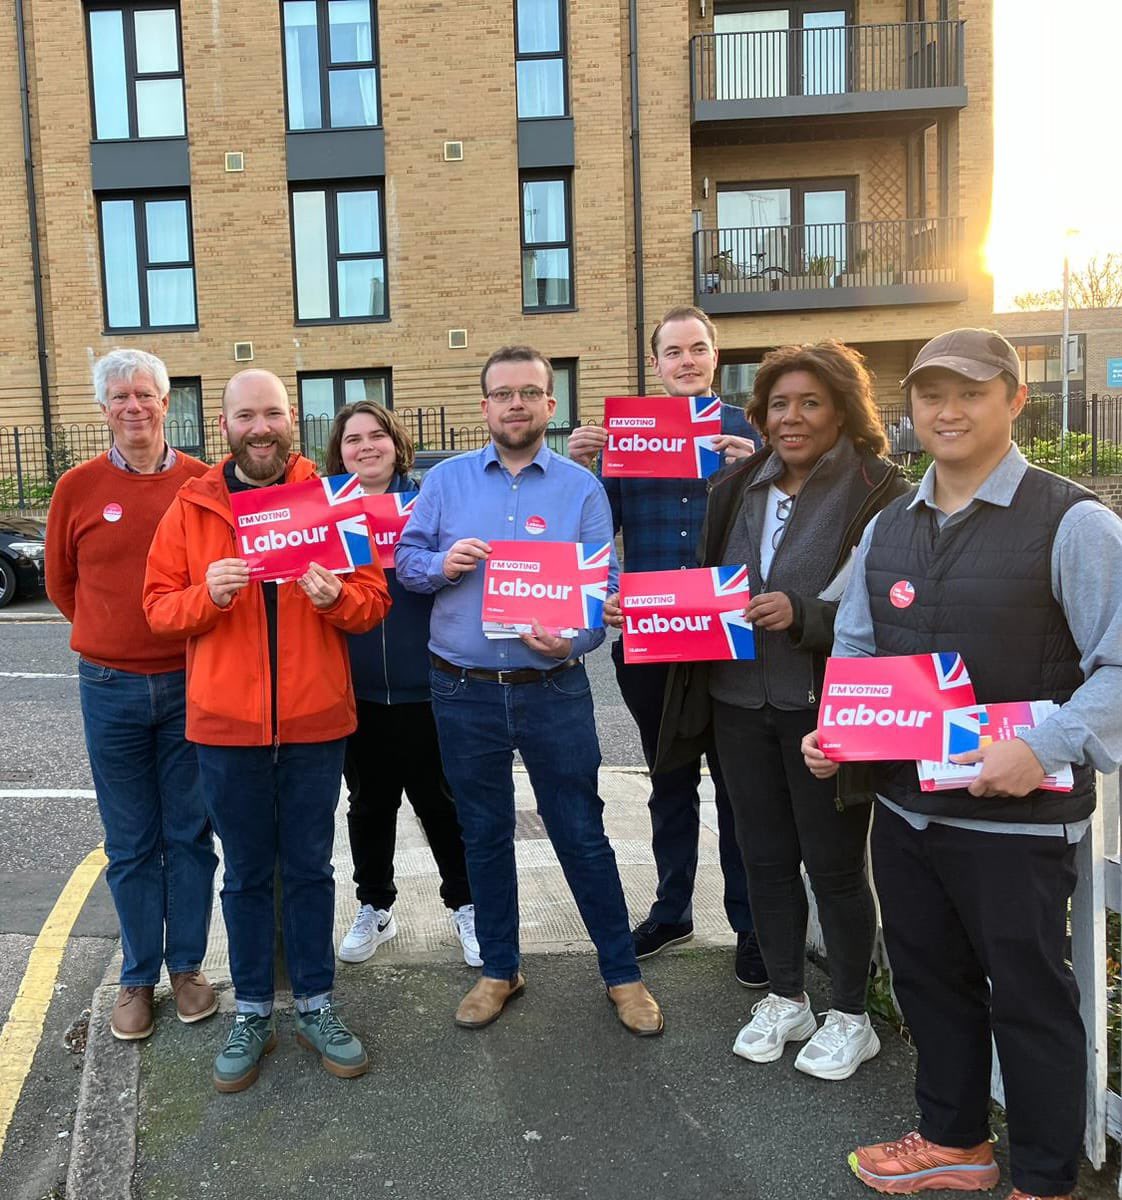 Dream team out in Greenwich Peninsula tonight - lots of support for @Len_Duvall and @SadiqKhan on the doorstep. Remember to bring photo ID 🪪 and use all three votes for @UKLabour on 2nd May 🗳️🌹